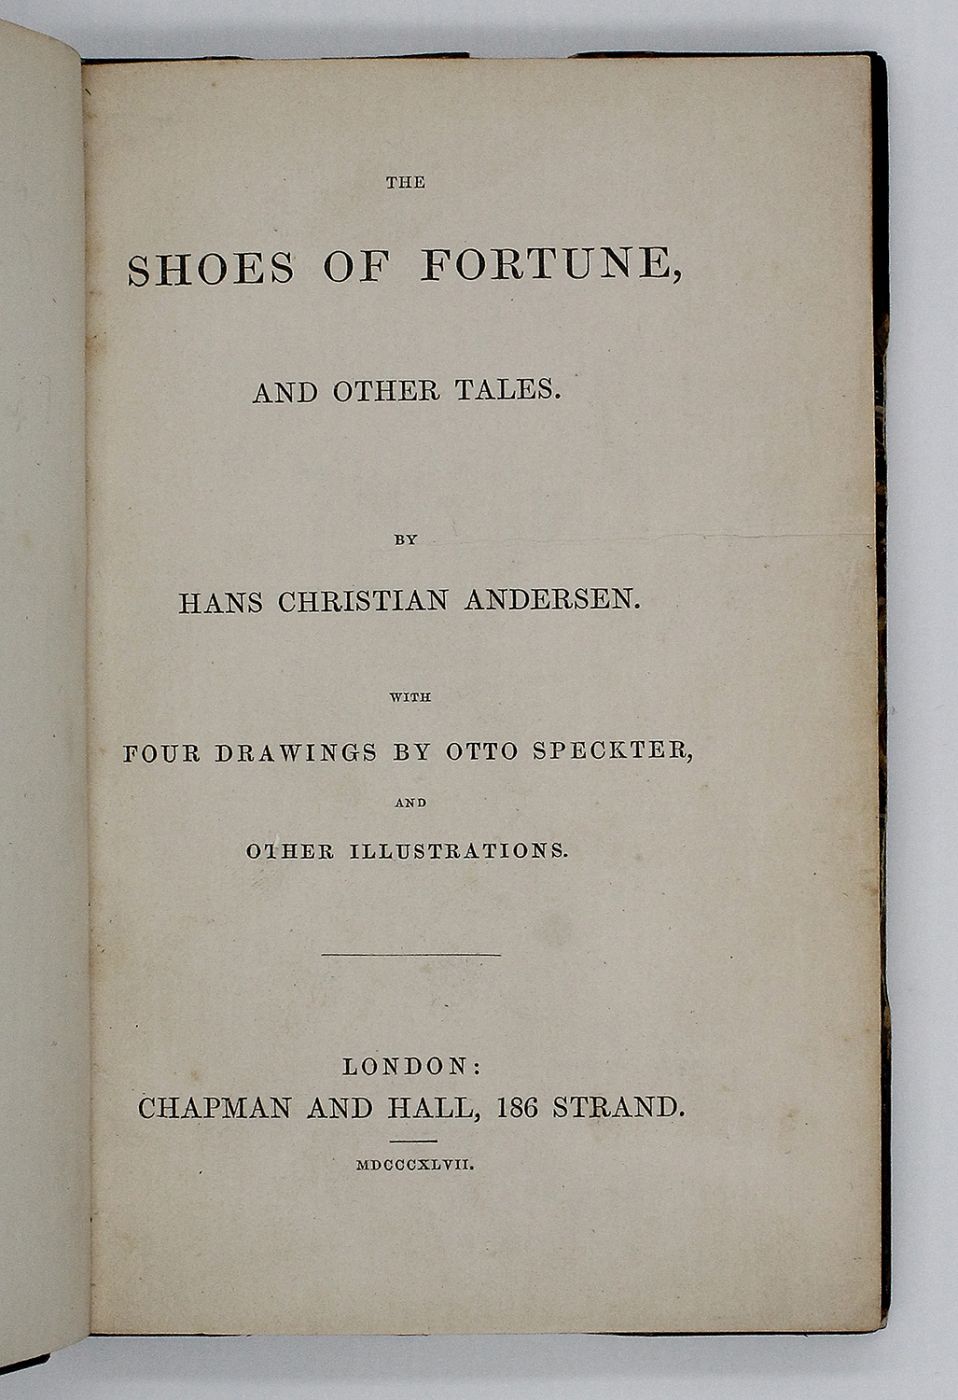 THE SHOES OF FORTUNE AND OTHER TALES -  image 4